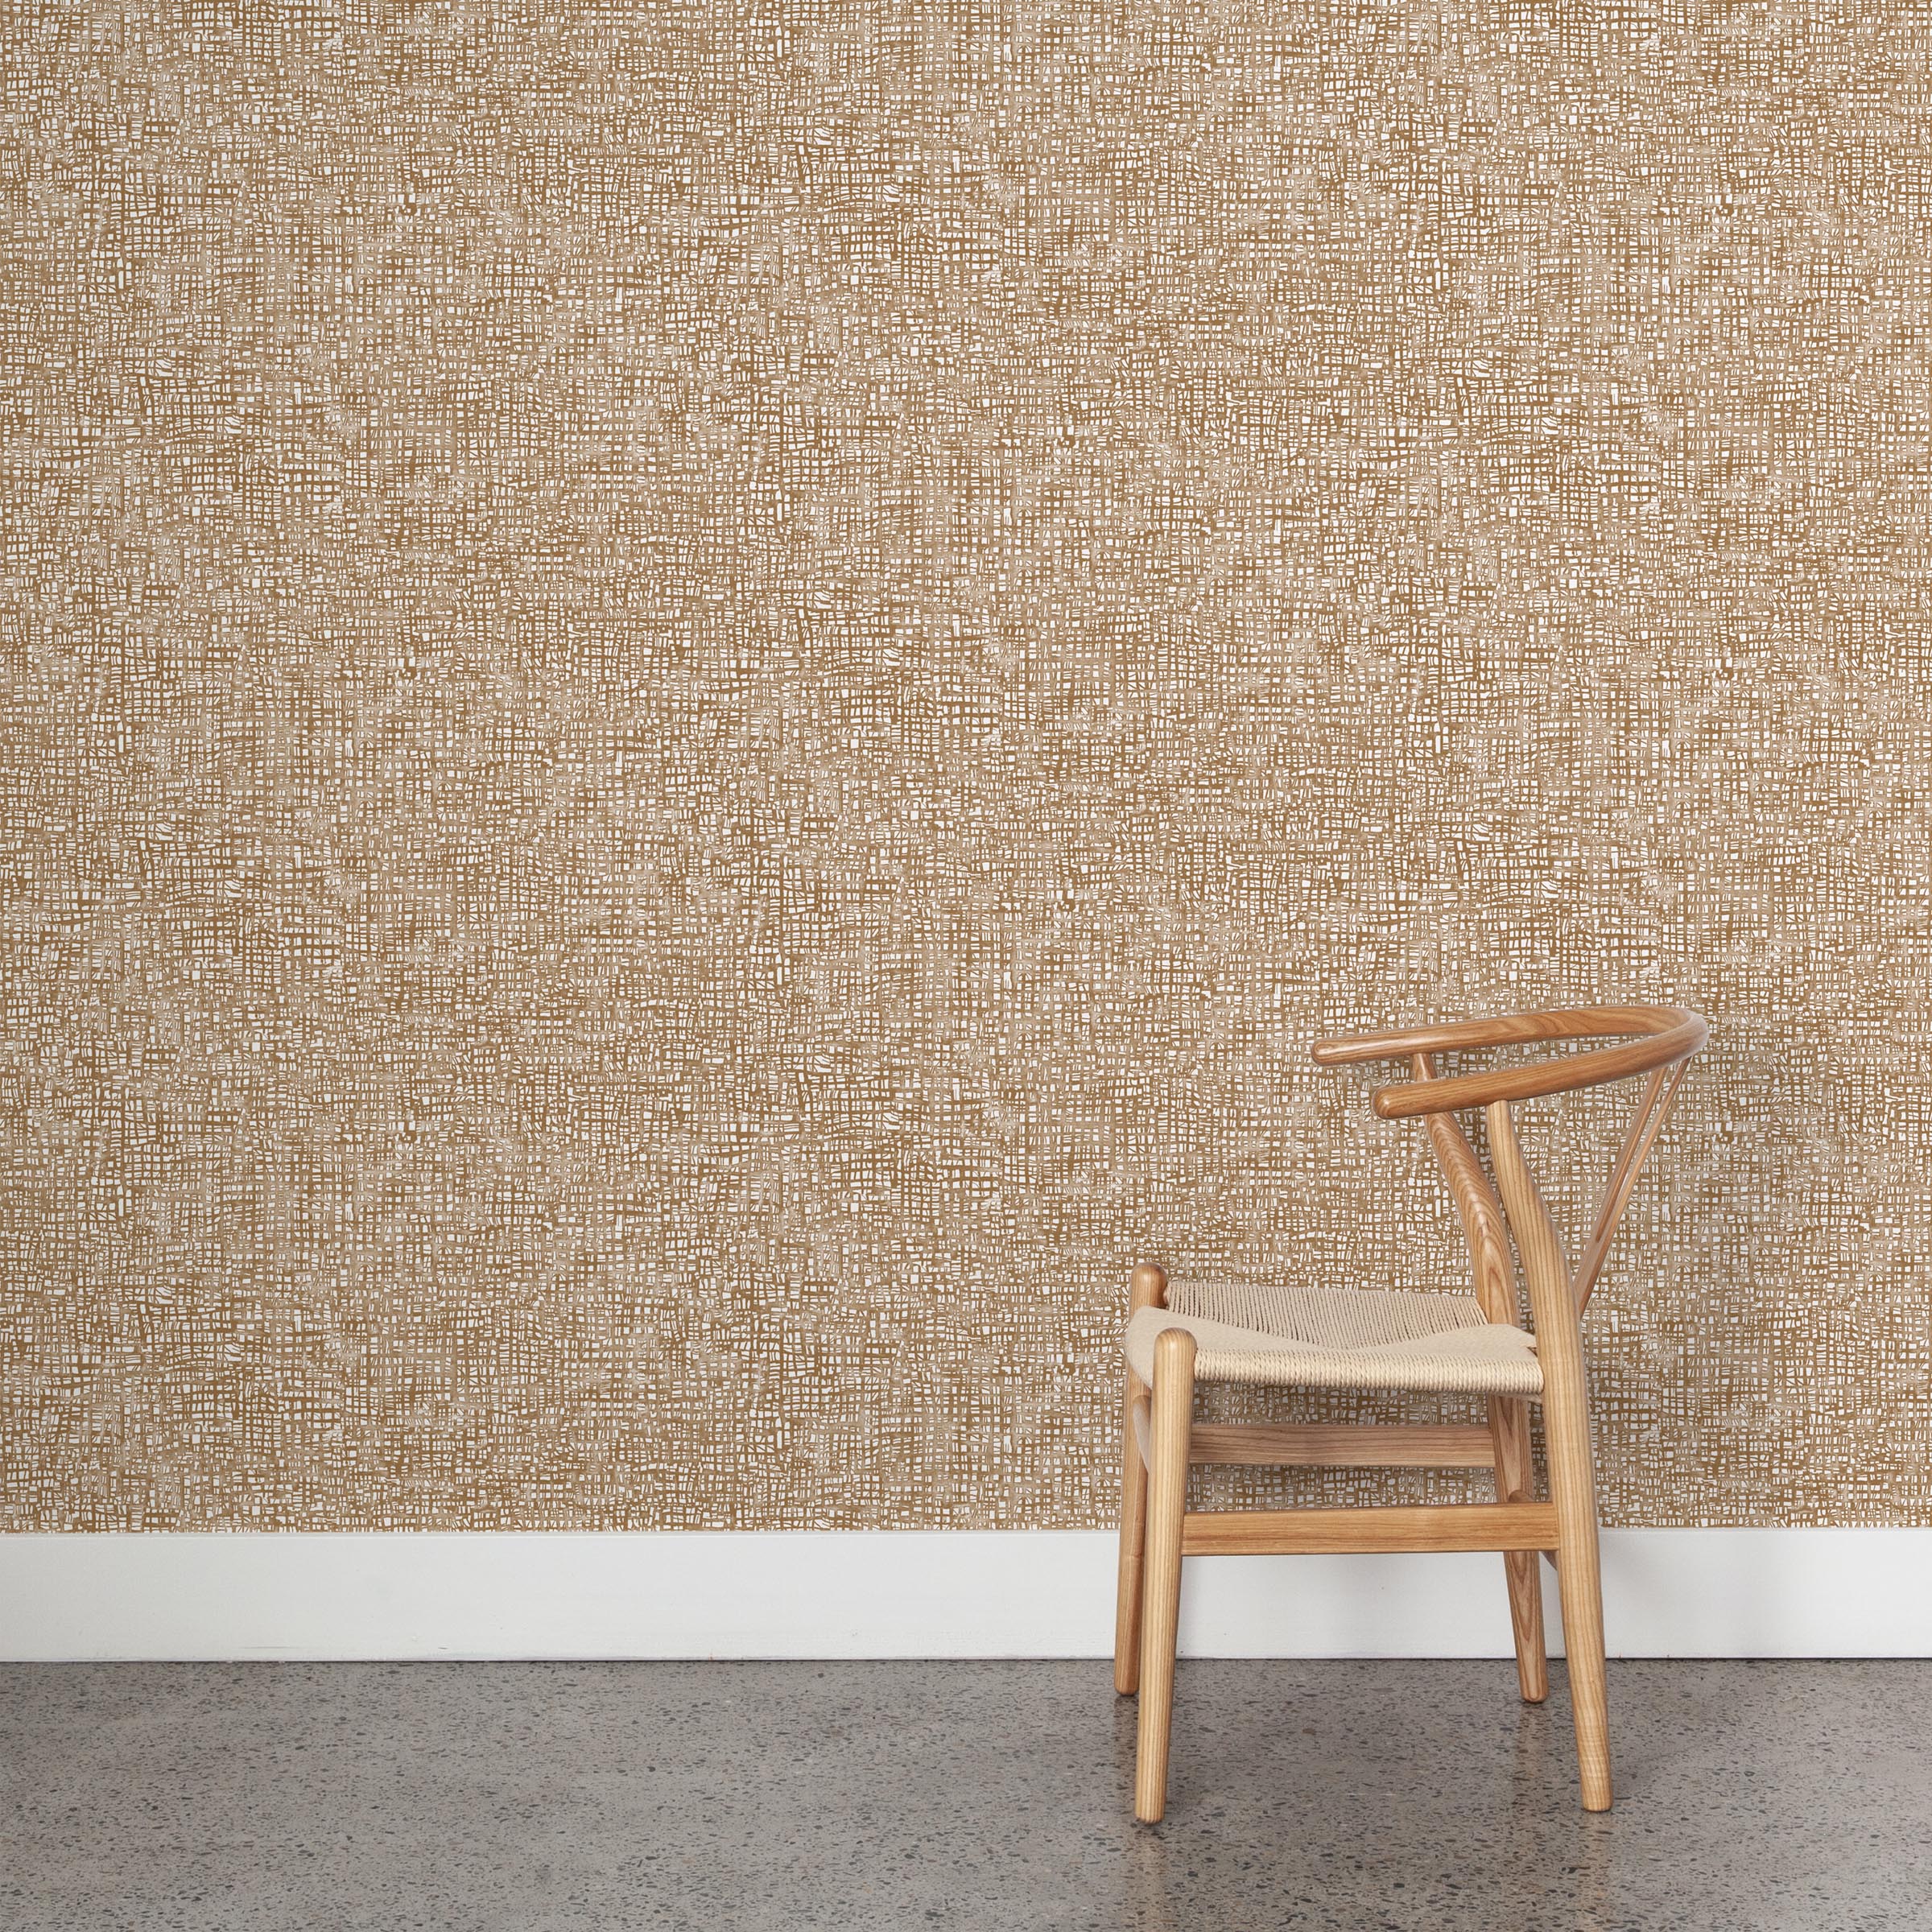 A wooden chair stands in front of a wall papered in a textural wicker pattern in mottled tan on a white field.